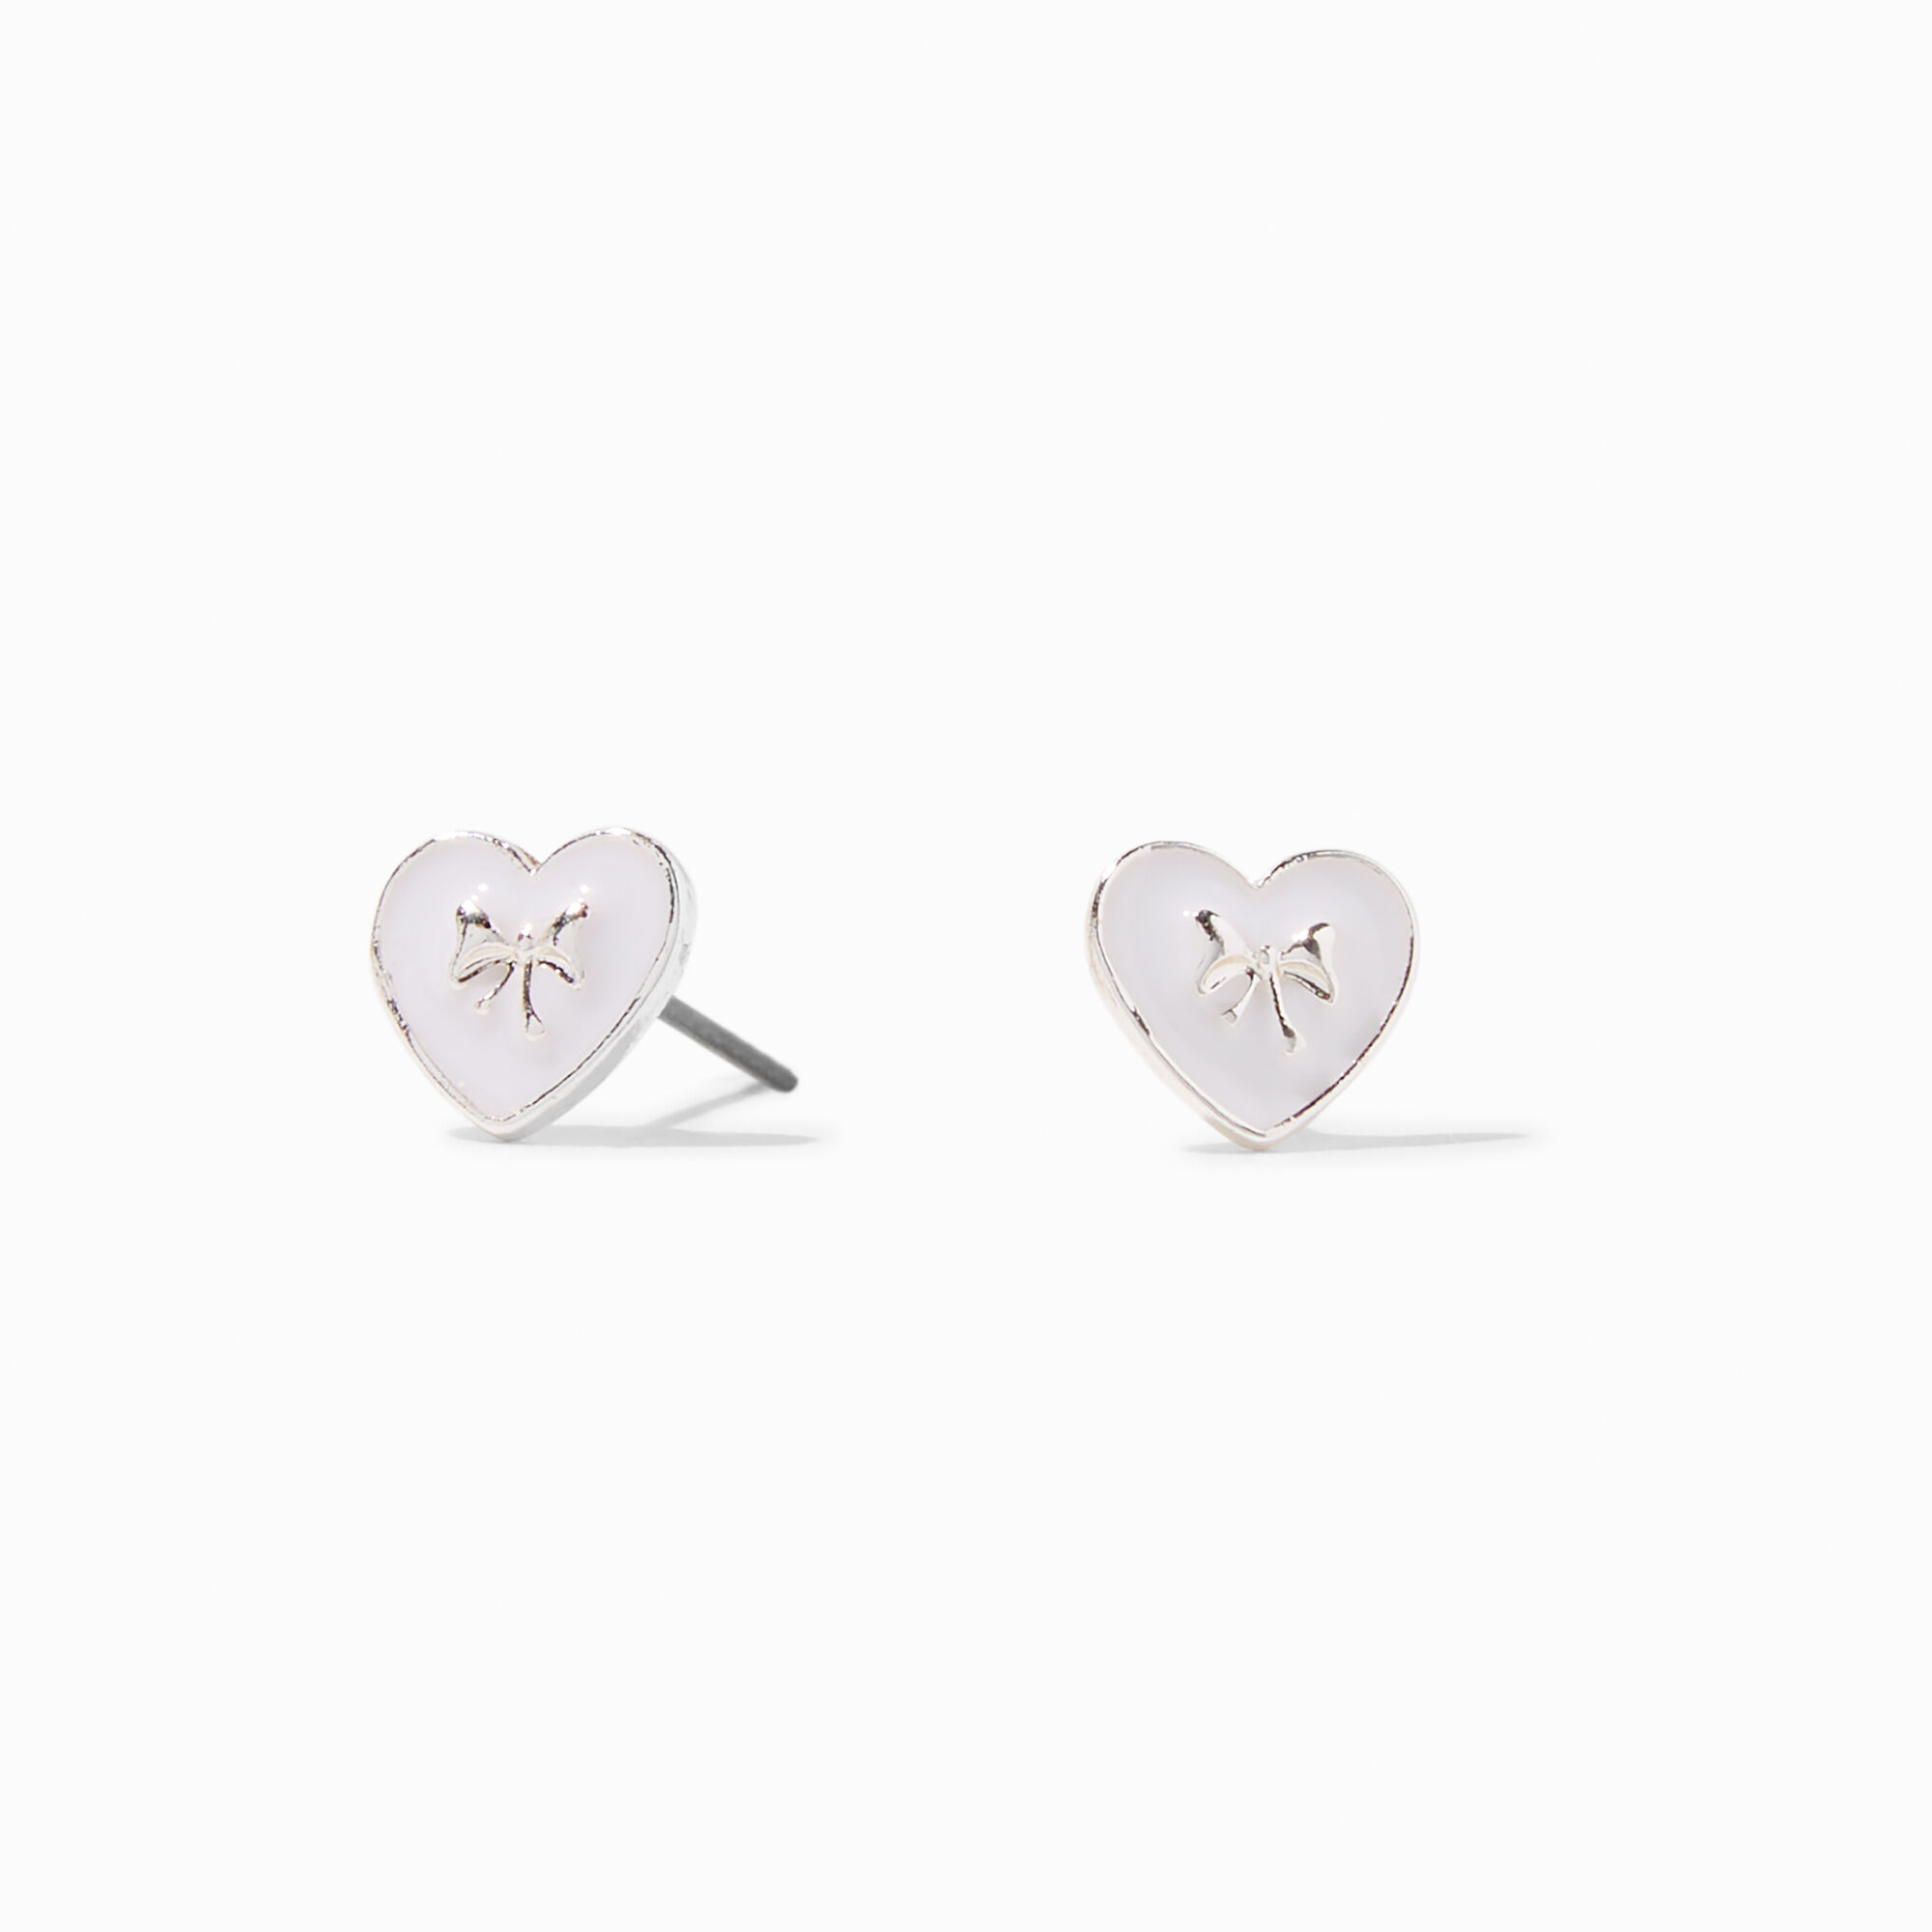 View Claires SilverTone Bow Heart Stud Earrings White information